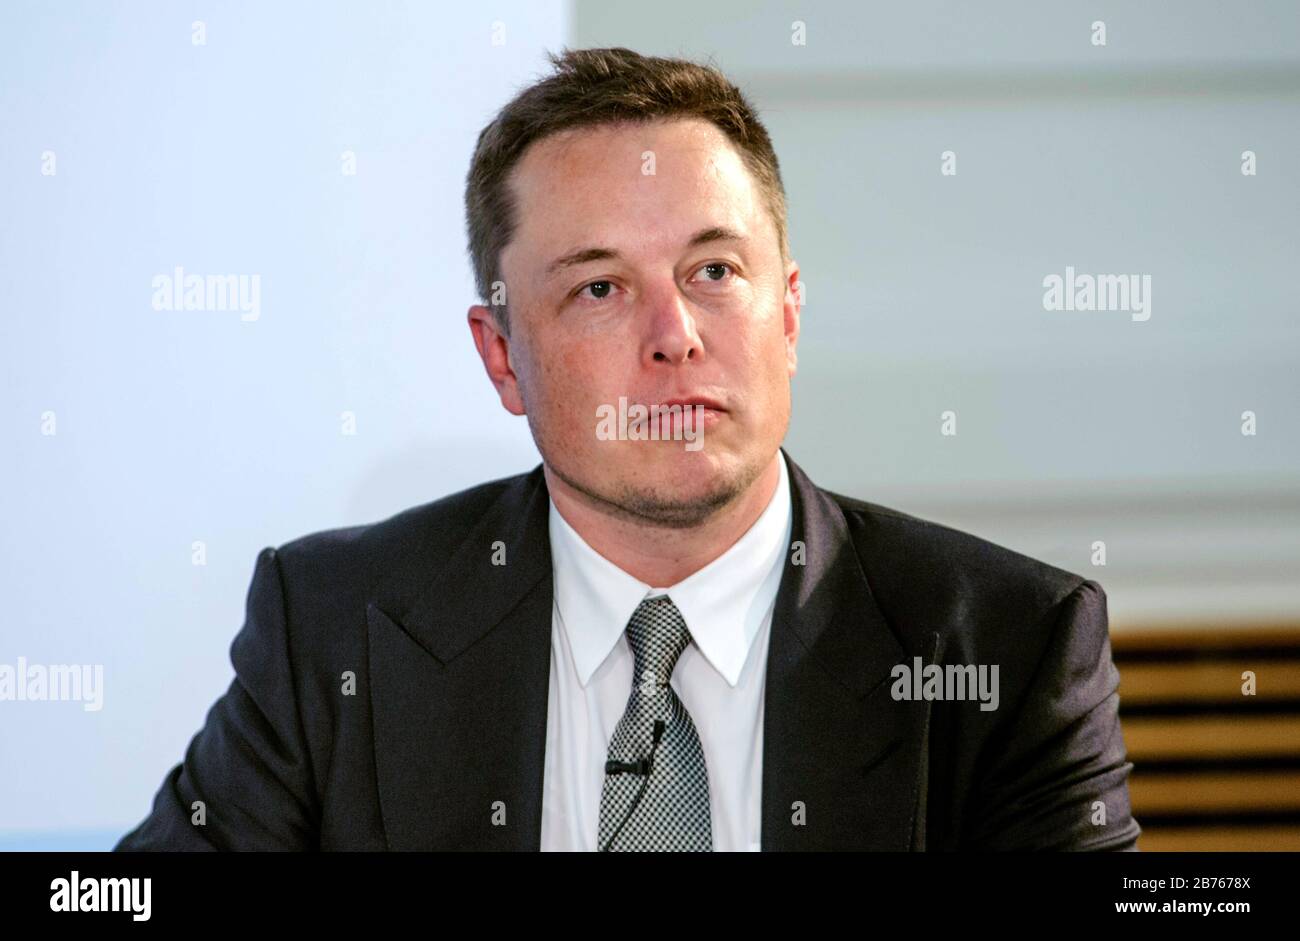 Germany, Berlin, 24.09.2015. Panel discussion 'Economy for tomorrow - Federal Minister of Economics Sigmar Gabriel in discussion with Elon Musk, CEO of Tesla Motors in the Federal Ministry of Economics and Energy in Berlin on 24.09.2015. Elon Musk, Chairman, Product Architect and CEO of Tesla Motors. [automated translation] Stock Photo